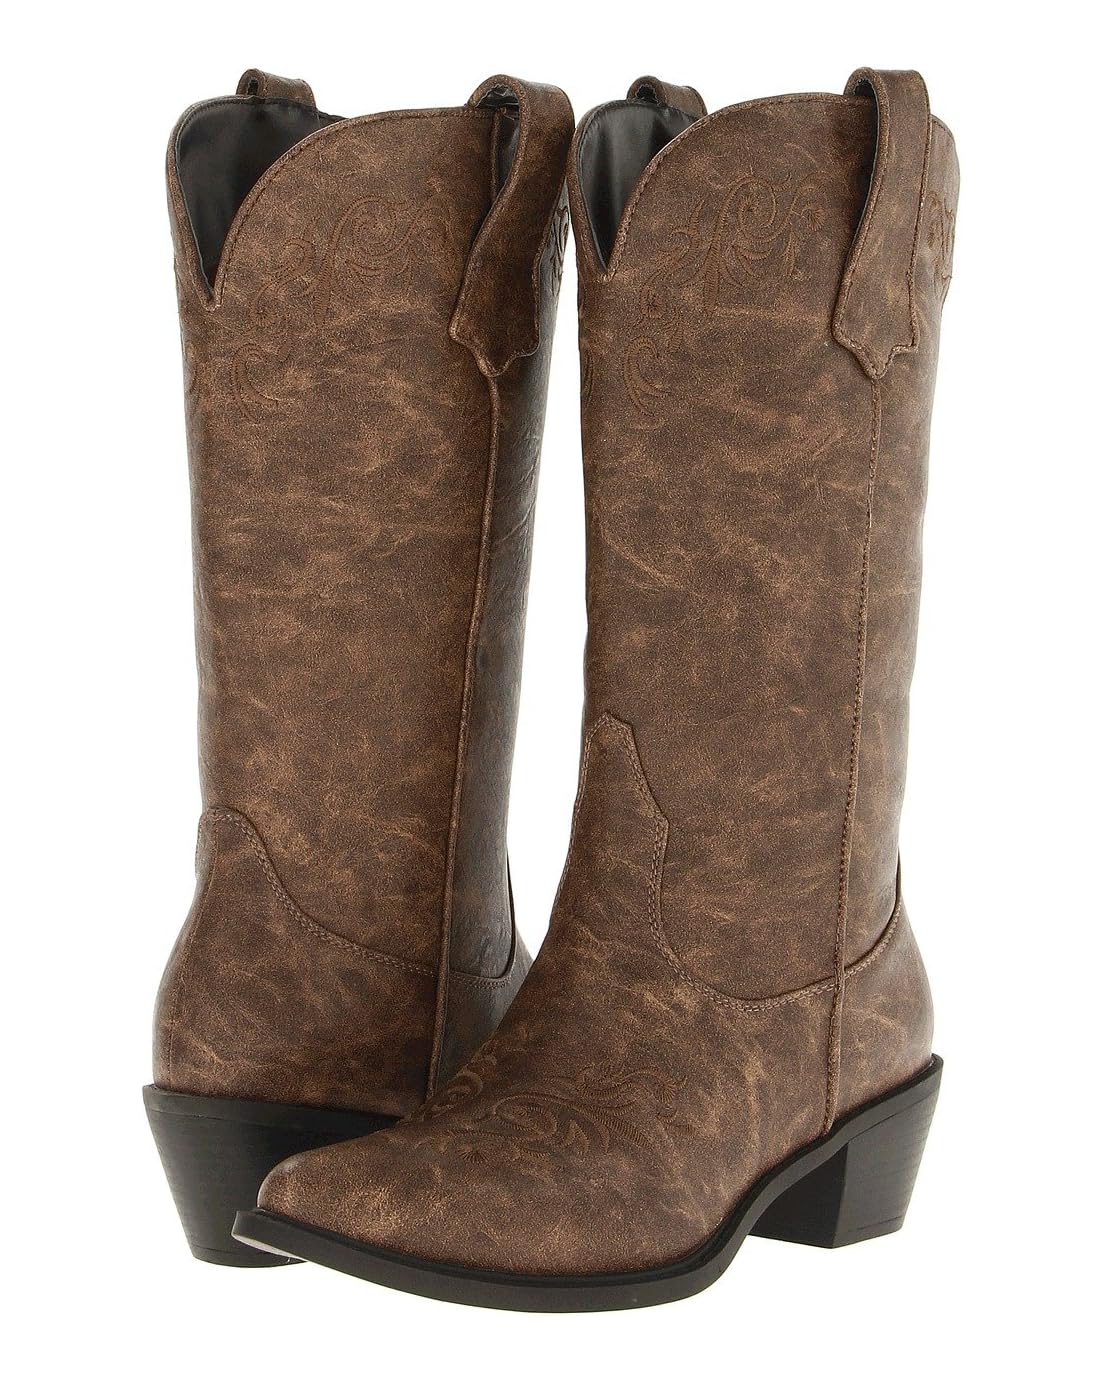 Roper Western Embroidered Fashion Boot